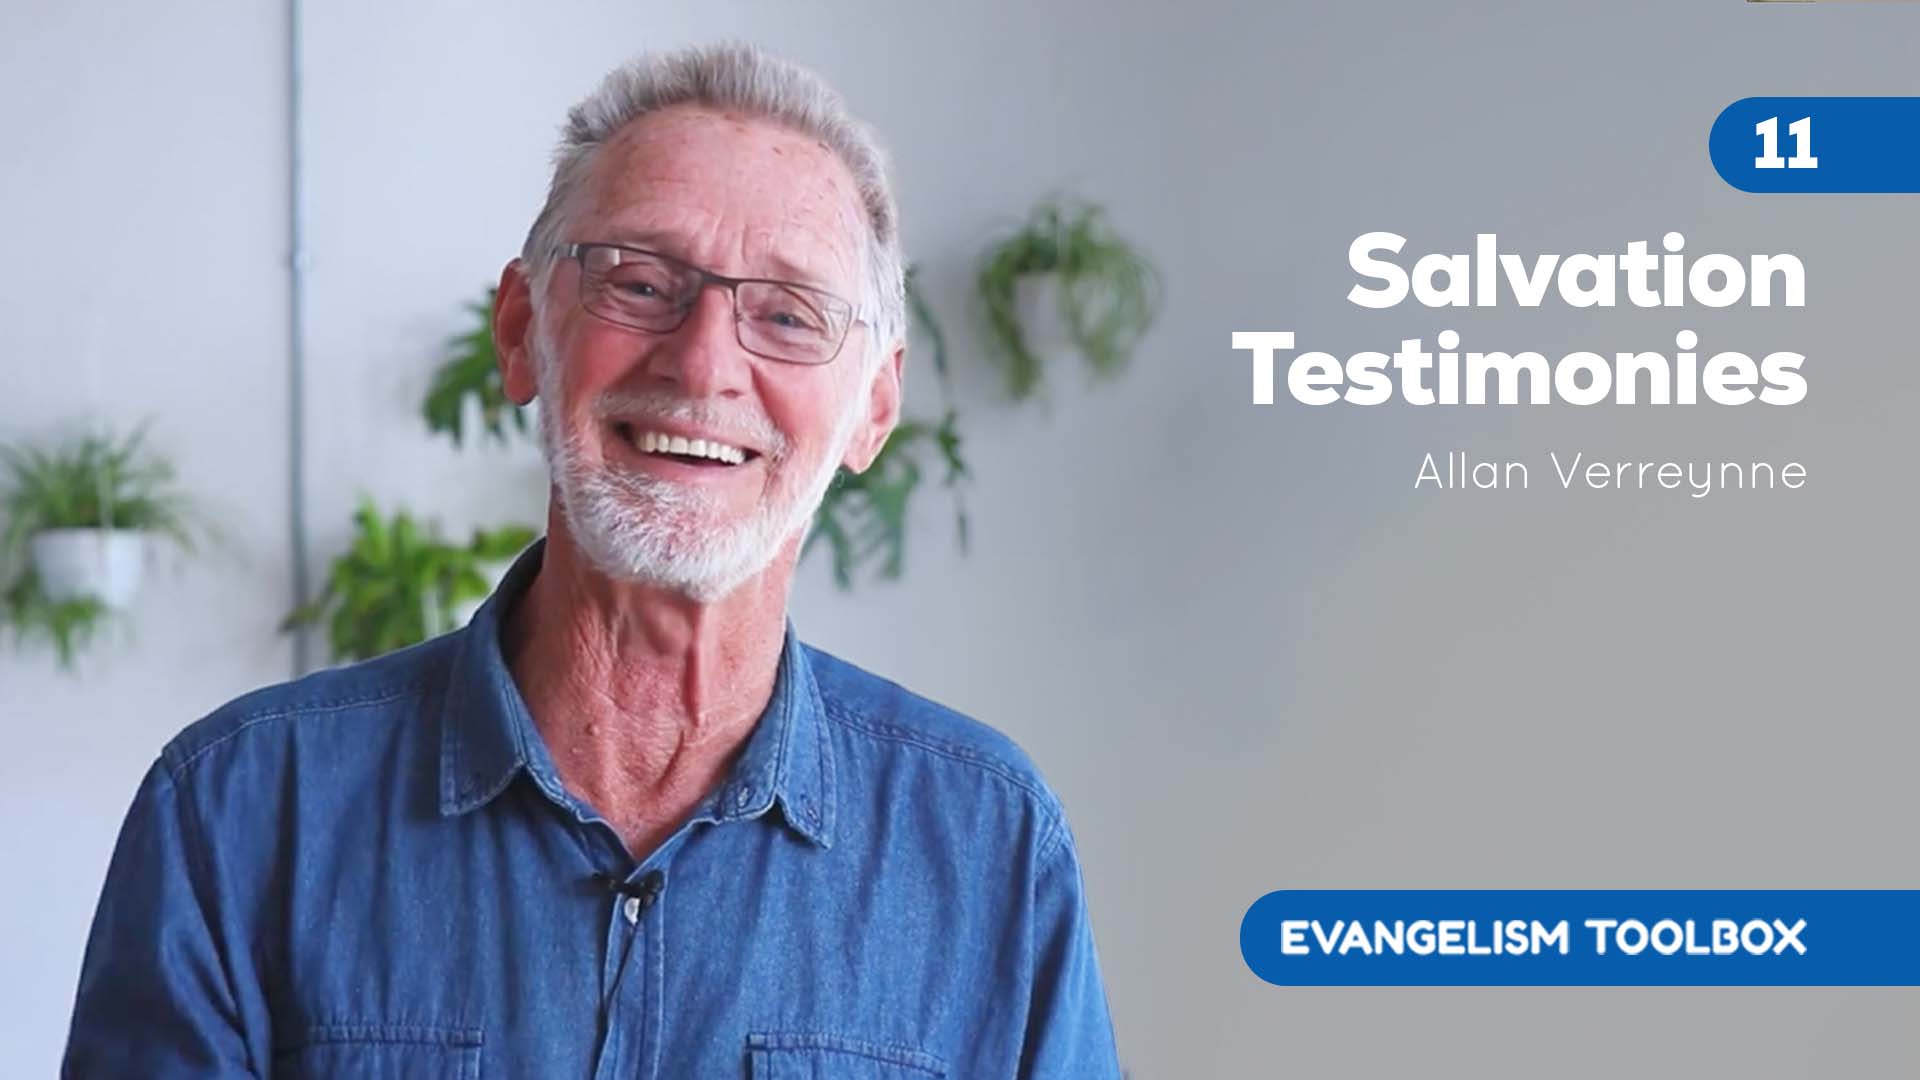 Video image for '11 Salvation Testimonies' about salvations